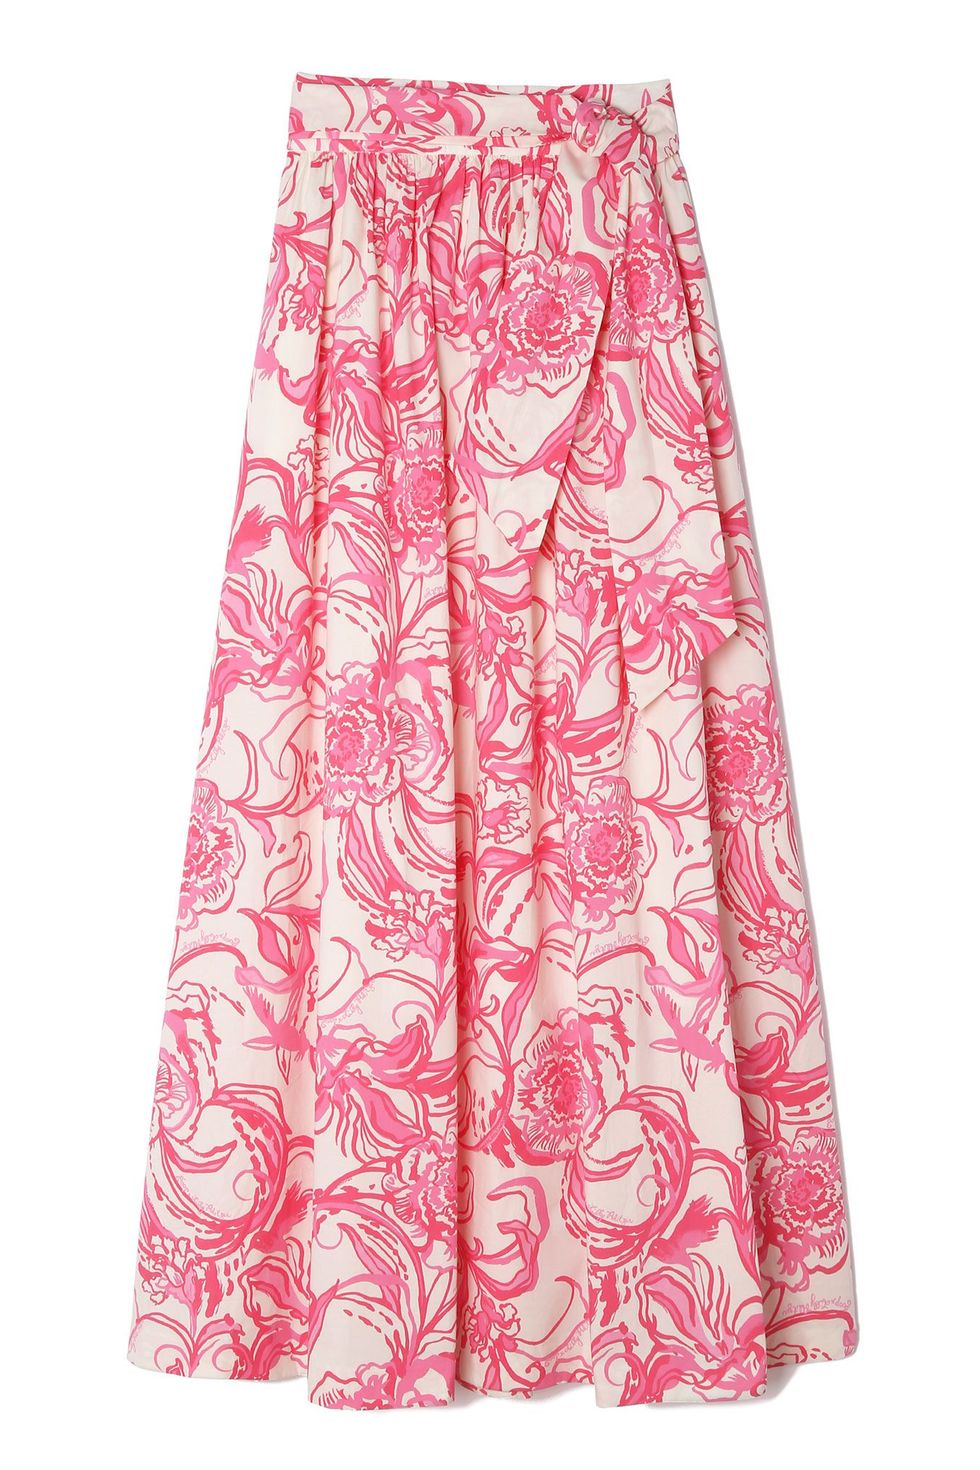 Lilly Pulitzer x Goop Lilly Maxi Skirt